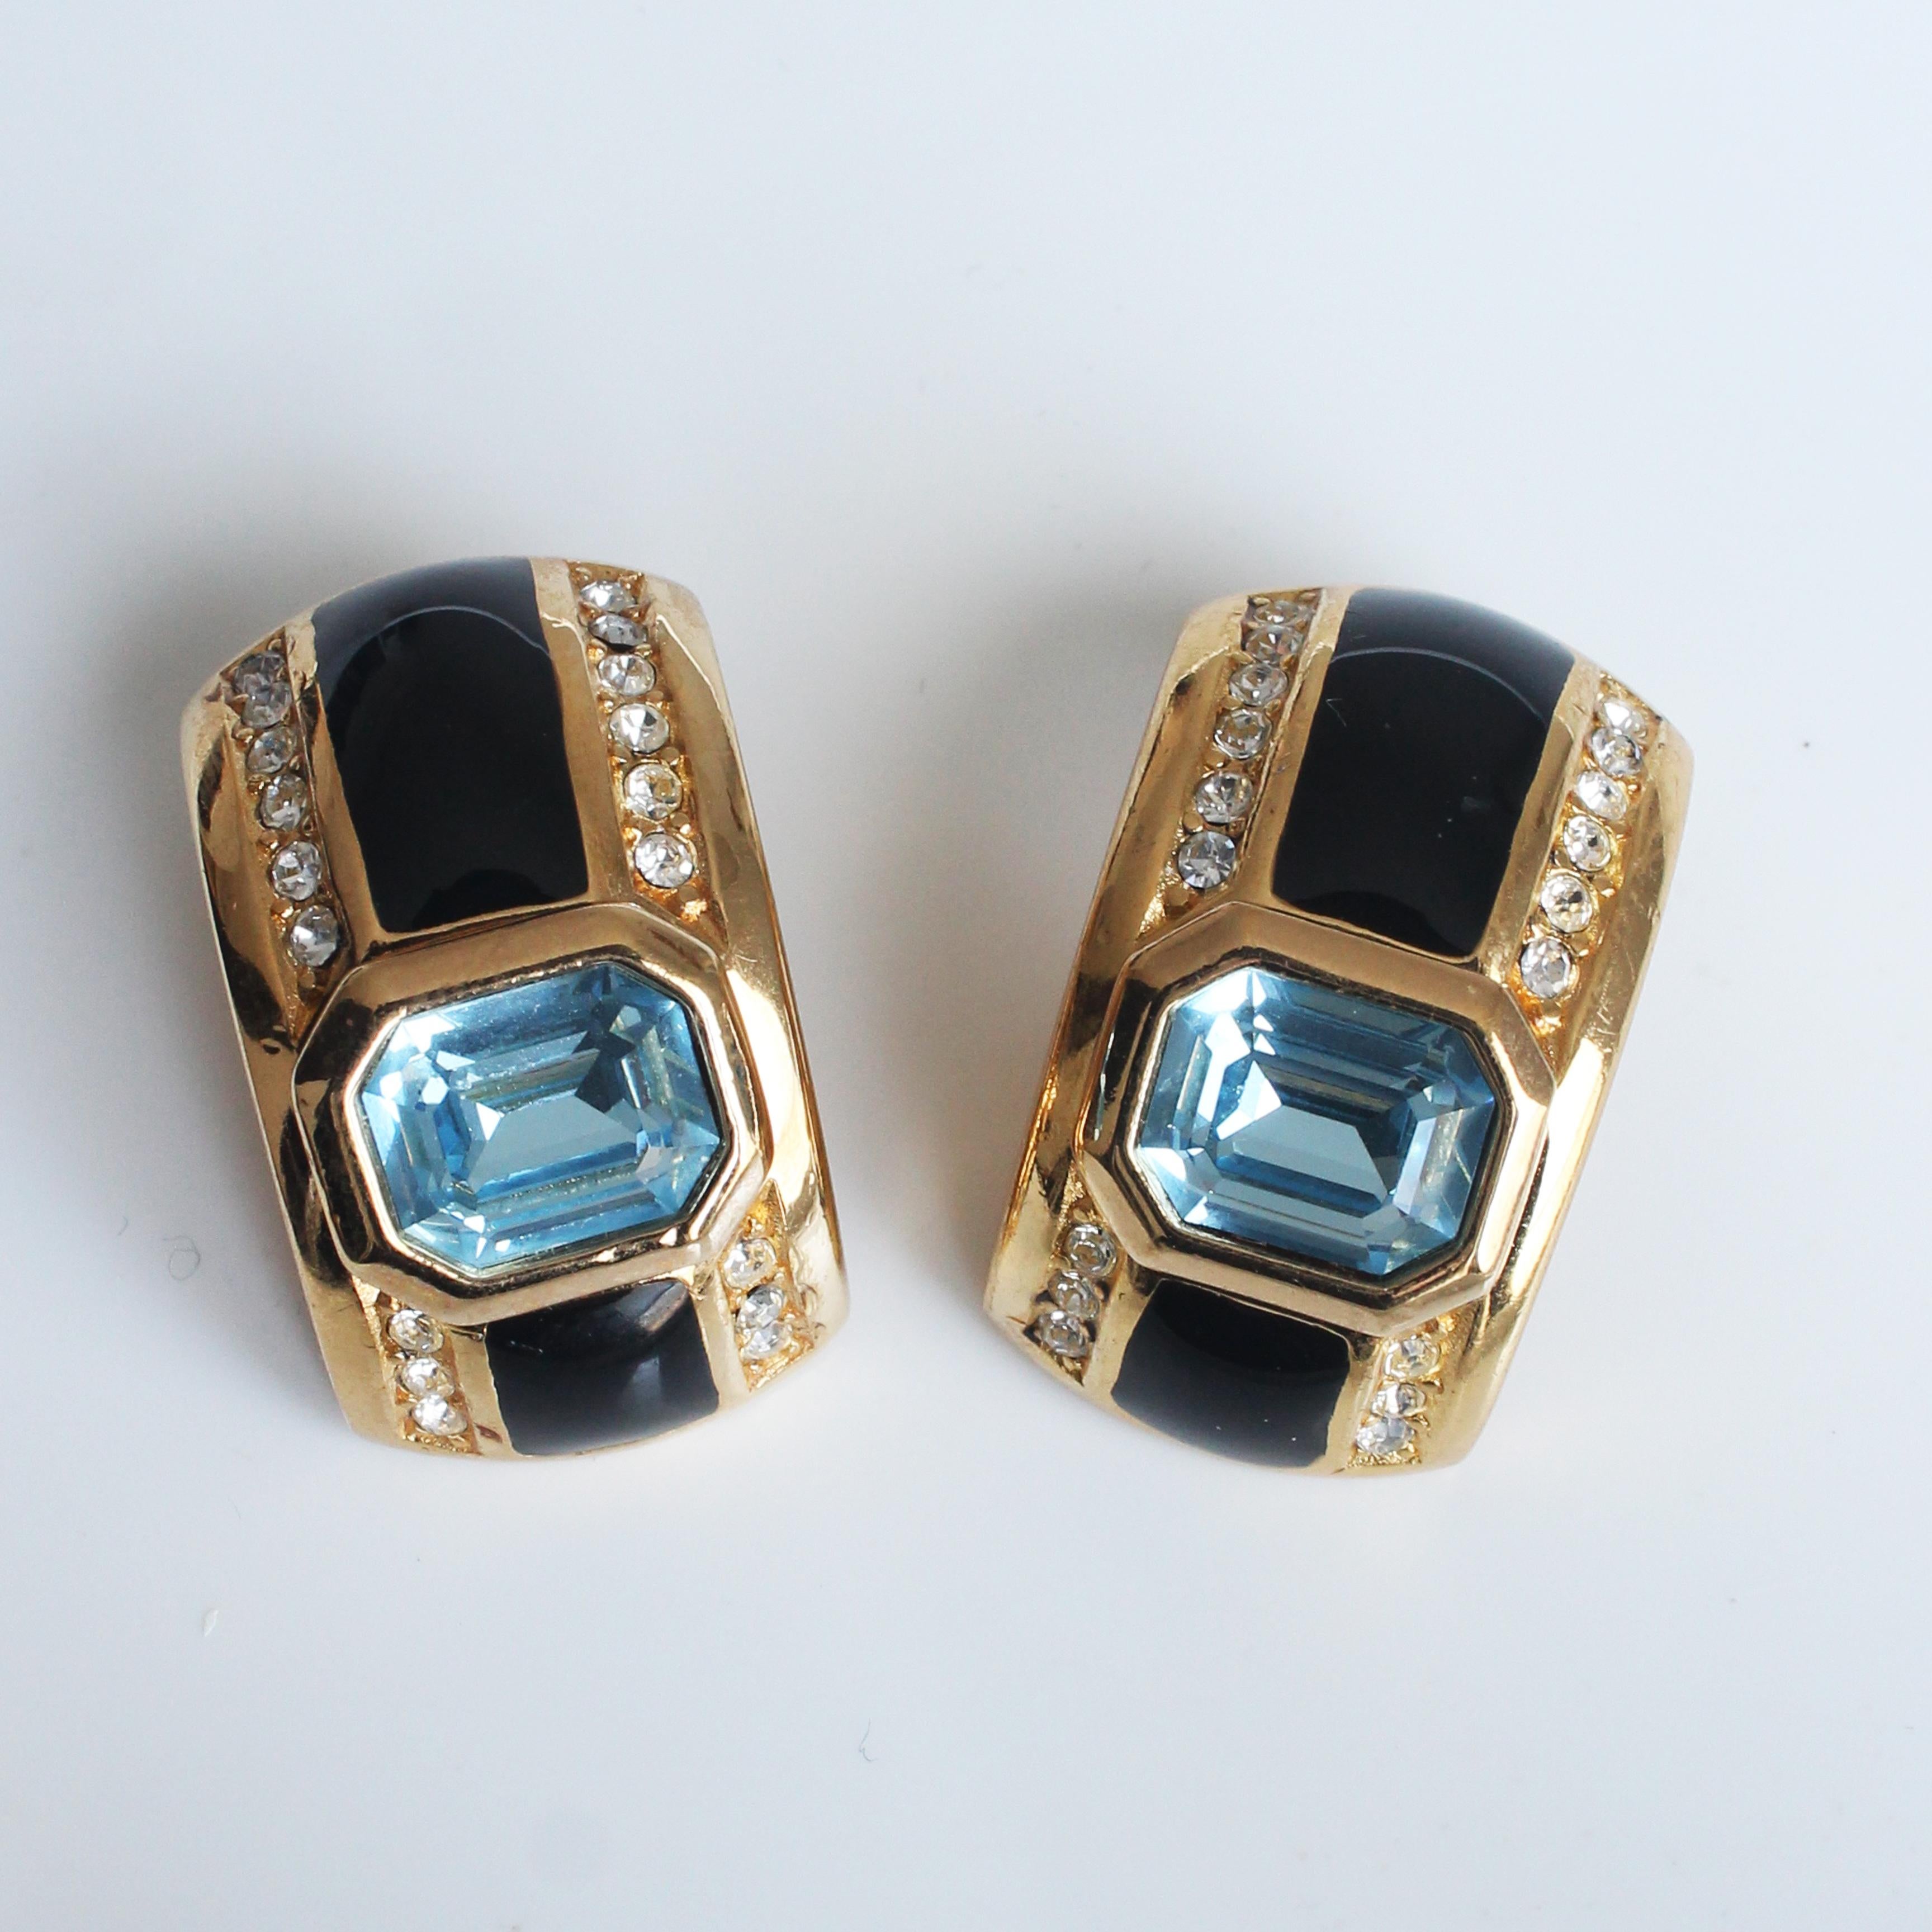 Christian Dior Art Deco Earrings with Faux Sapphire Topaz Crystals 1980s For Sale 3